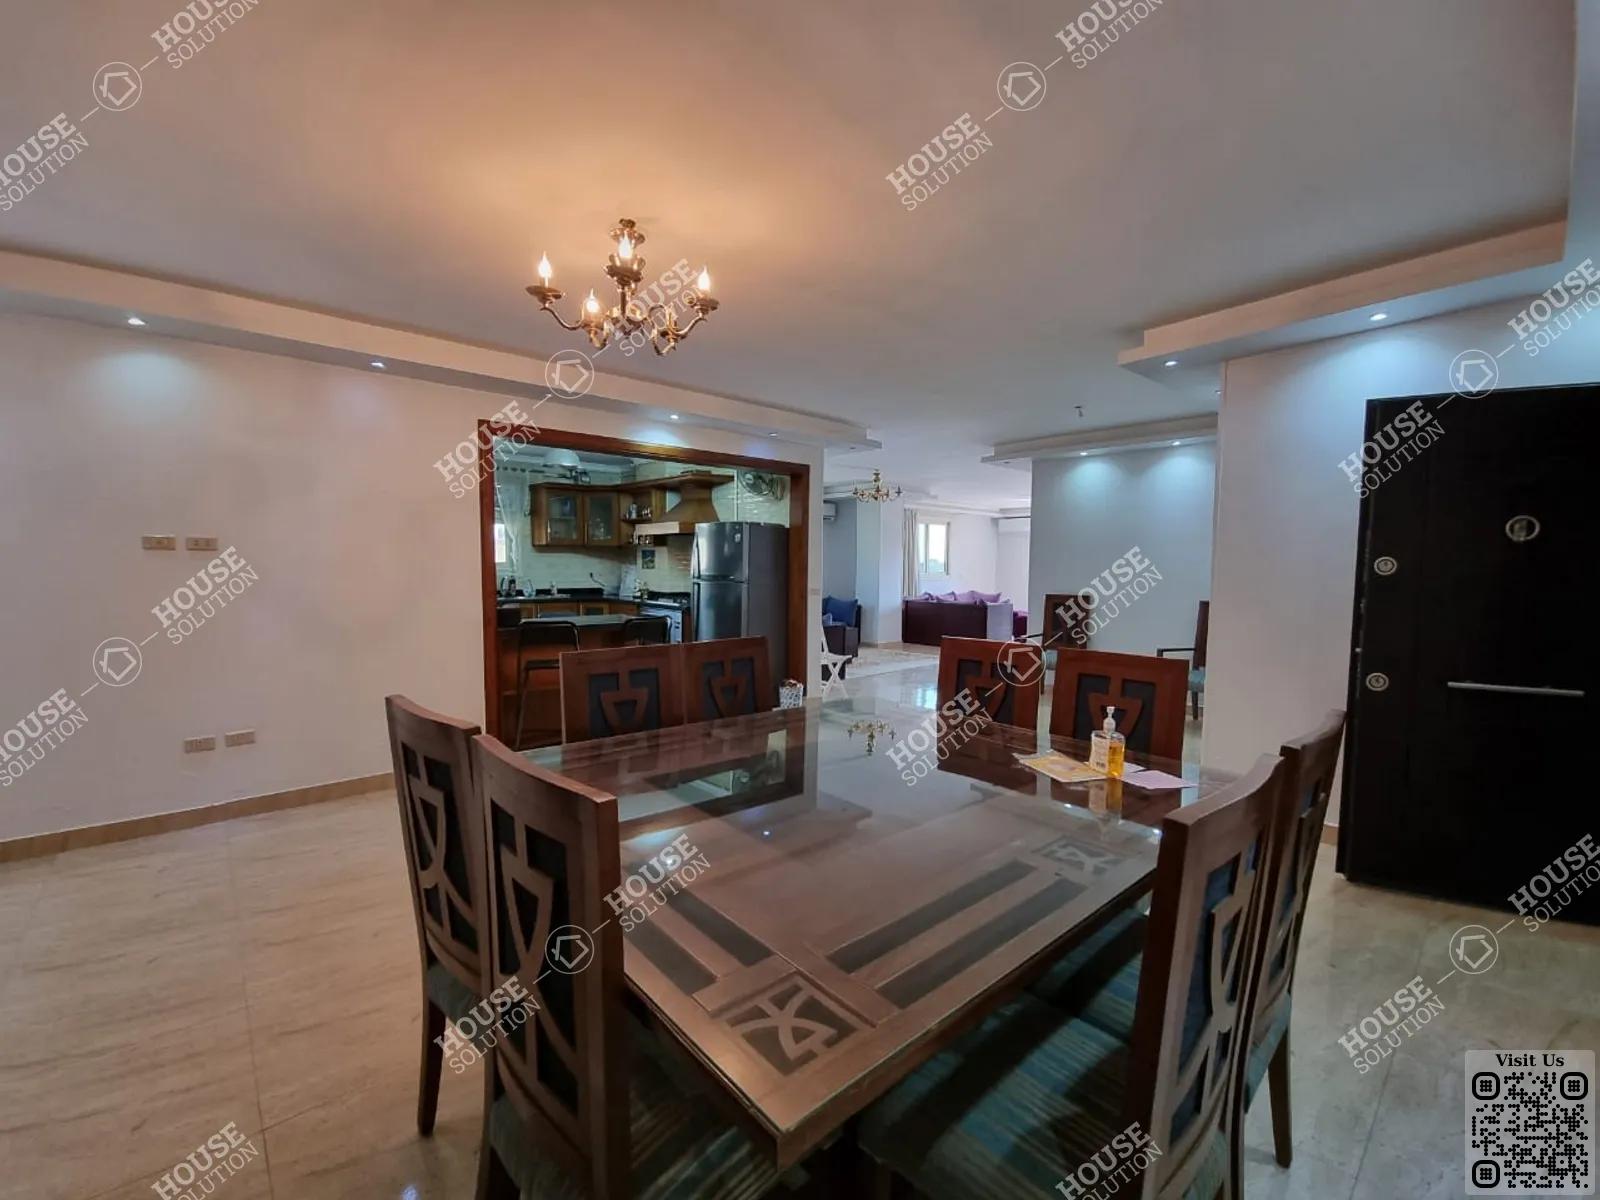 DINING AREA @ Apartments For Rent In Maadi Maadi Sarayat Area: 220 m² consists of 3 Bedrooms 3 Bathrooms Modern furnished 5 stars #5559-1